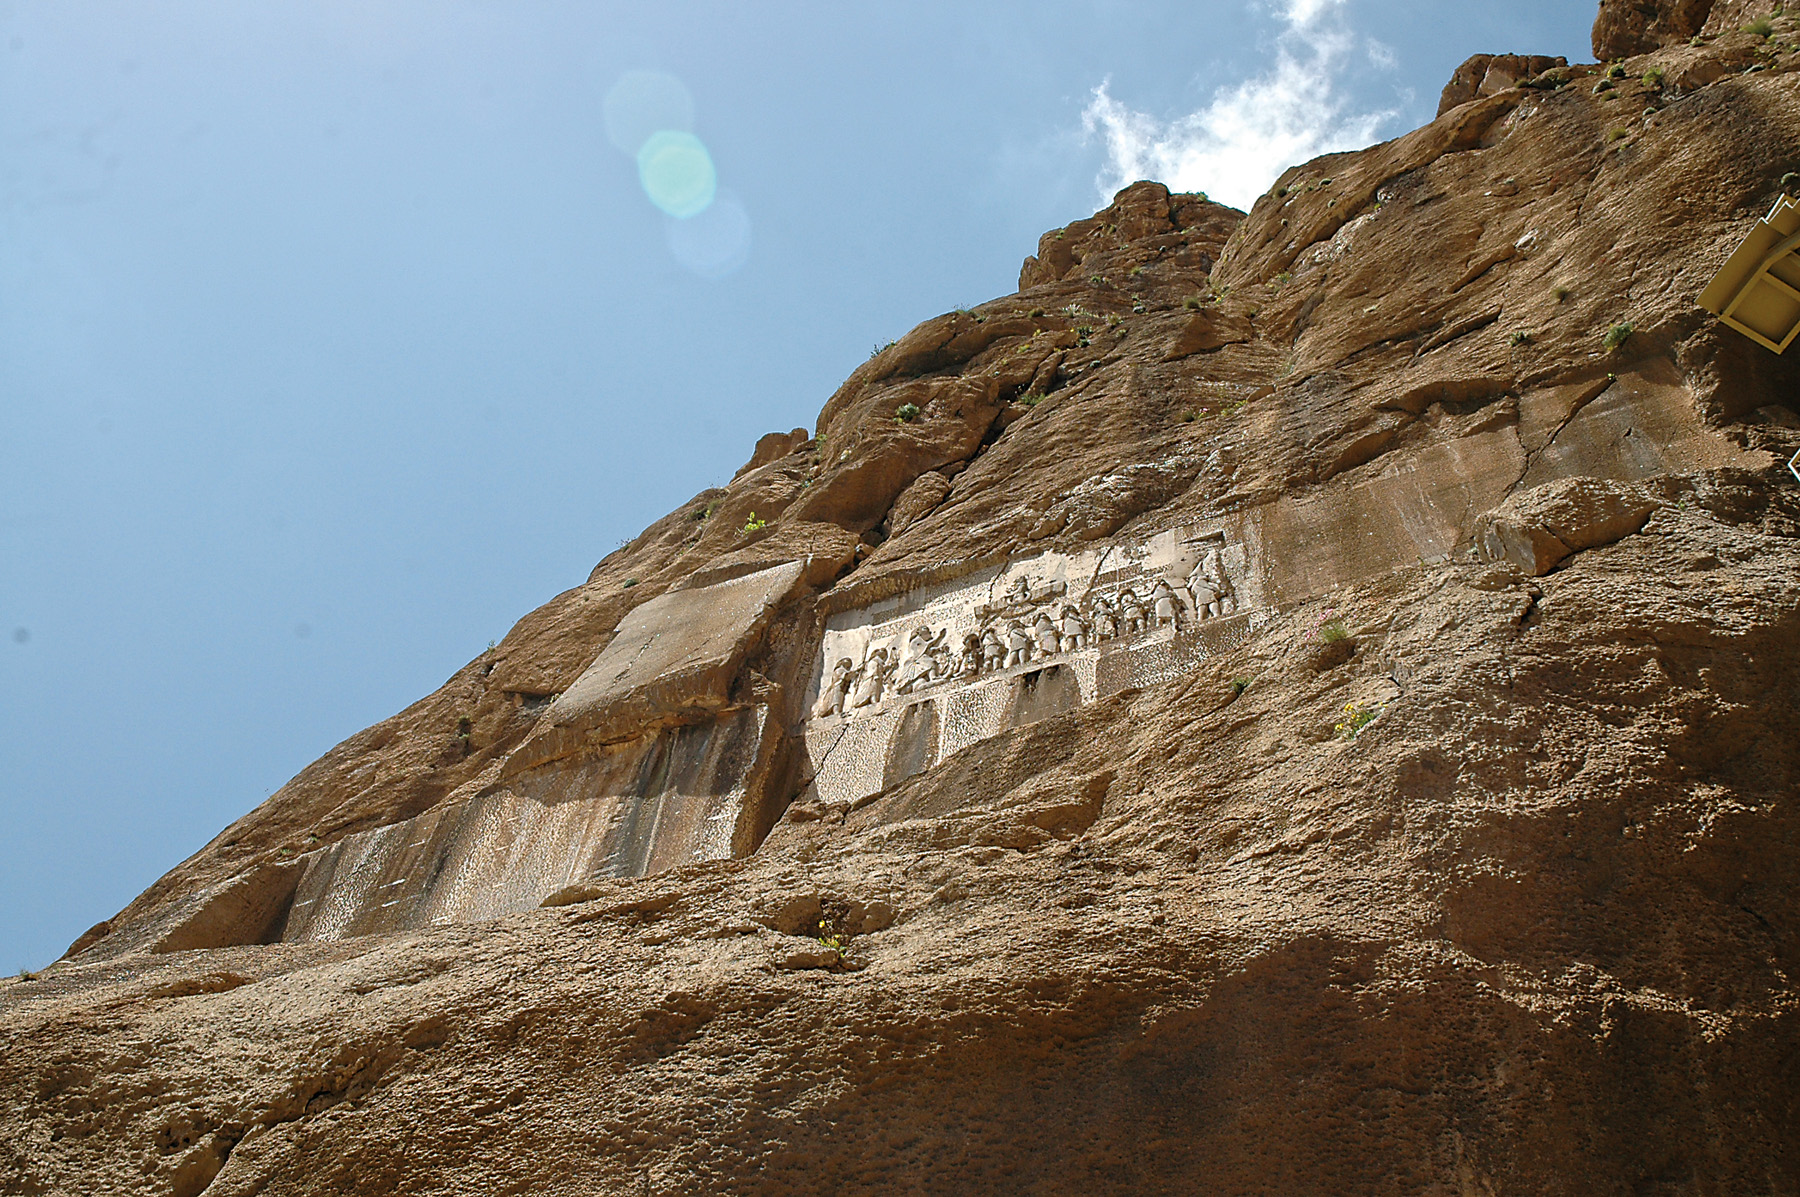 Sculpted in 521 BCE, the Behistun relief in Iran is a massive carving with more than 400 lines of inscription and huge figurines. Its size, location and visibility suggest it was used for propaganda.